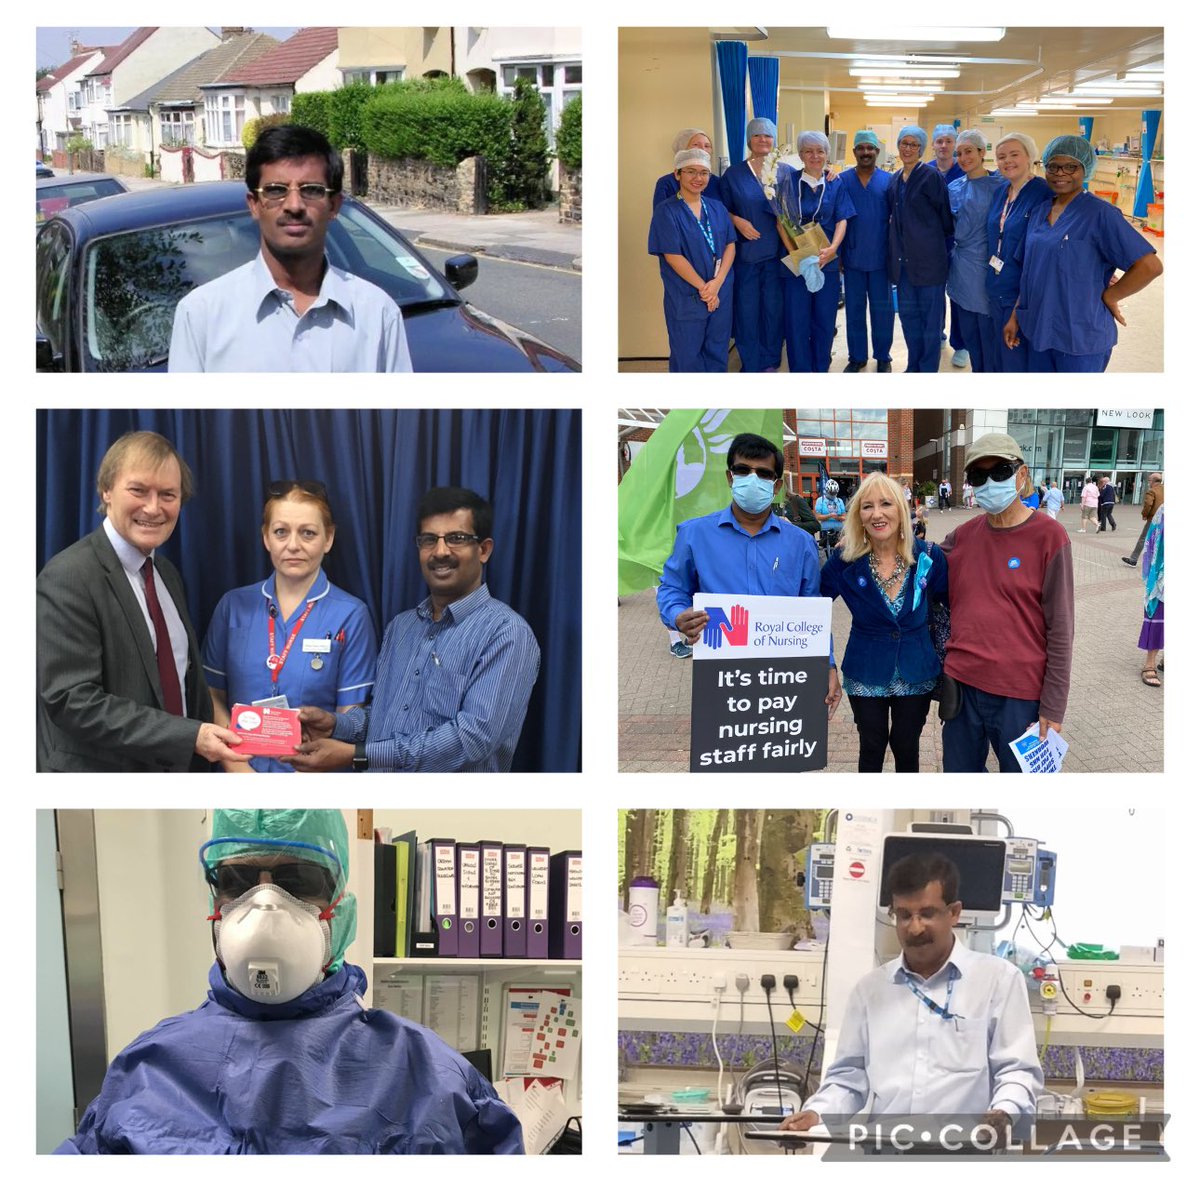 Started my career 20 years ago today at Southend University Hospital as supervised Practice Nurse. Had various roles, various teams, various managers in these 20 years. Thank You to all, past and present teams and Managers for their incredible support.@MSEHospitals @RCNEastern